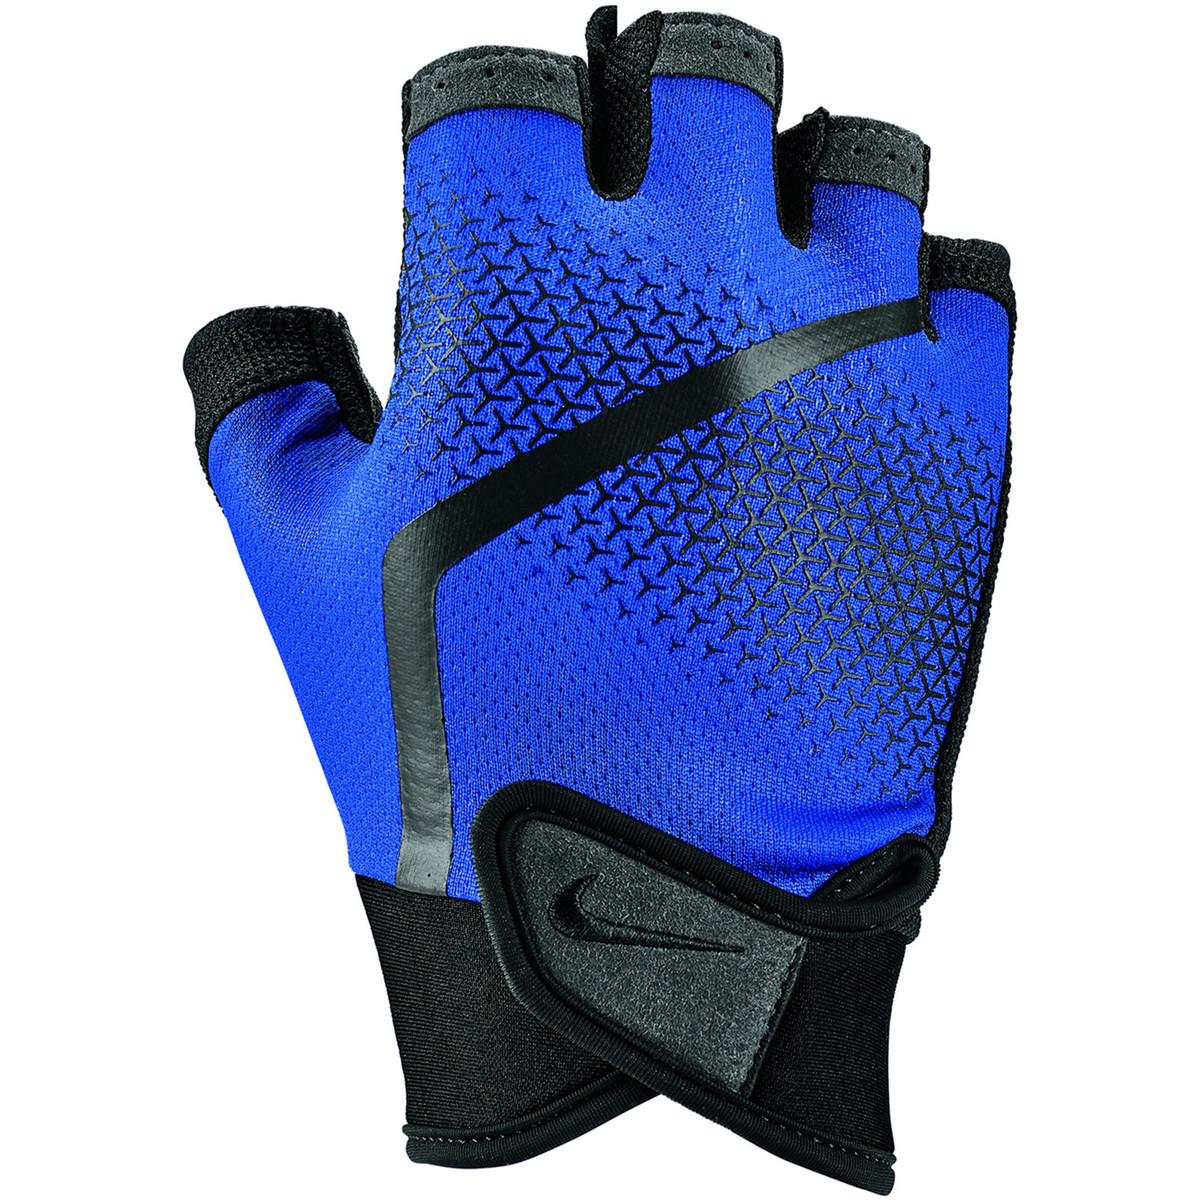 Nike Gants Mitaines Extreme Gloves in Blue | Lyst UK